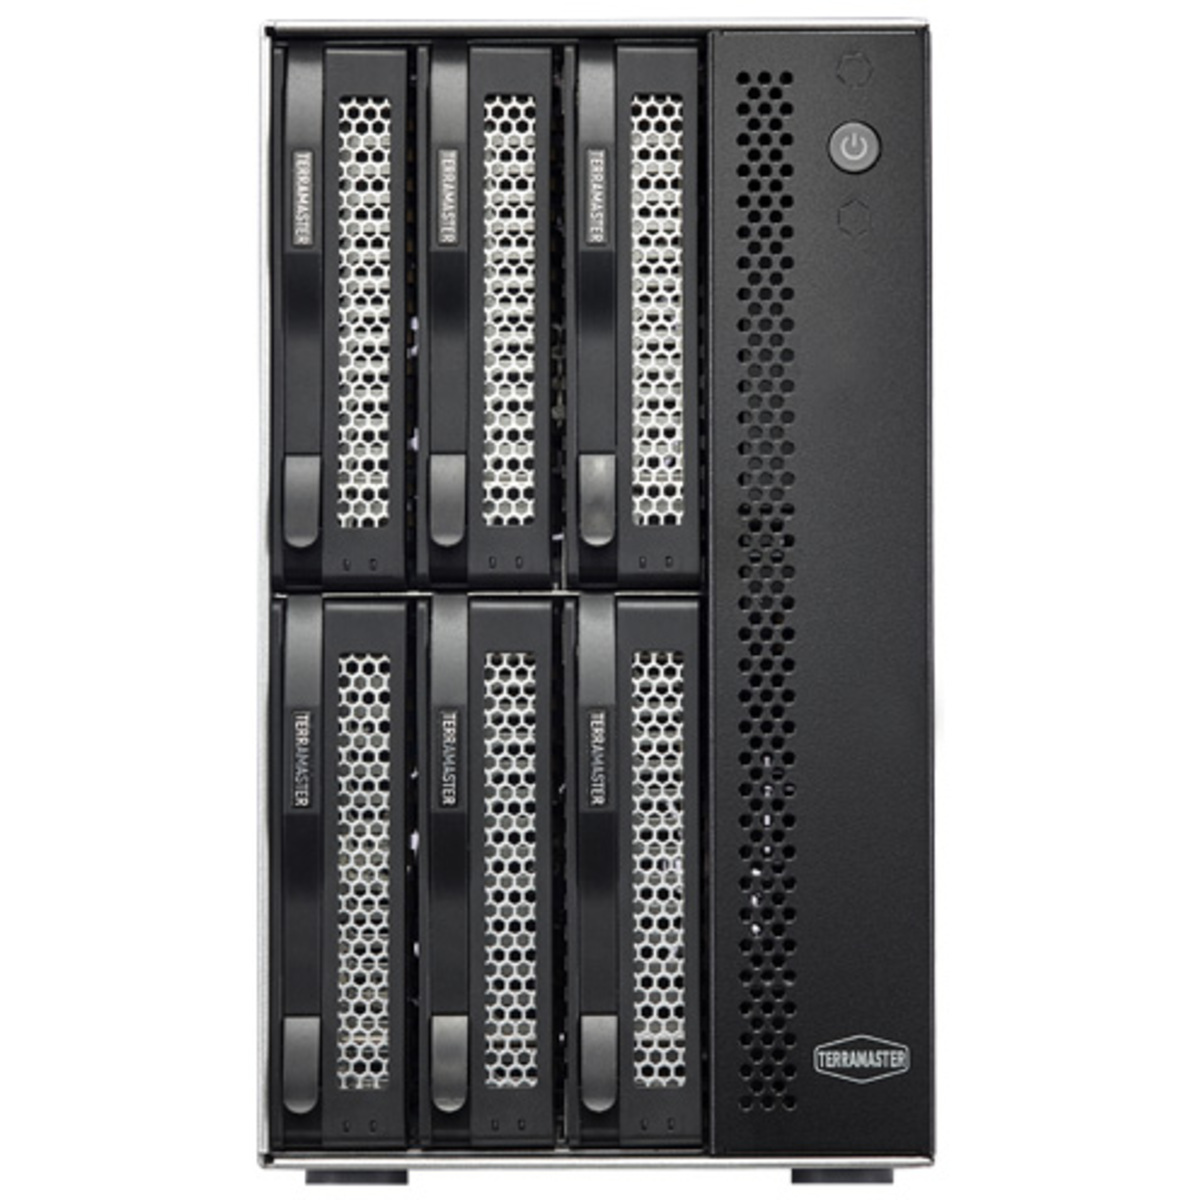 TerraMaster D6-320 32tb 6-Bay Desktop Multimedia / Power User / Business DAS - Direct Attached Storage Device 4x8tb Seagate IronWolf Pro ST8000NT001 3.5 7200rpm SATA 6Gb/s HDD NAS Class Drives Installed - Burn-In Tested - ON SALE D6-320